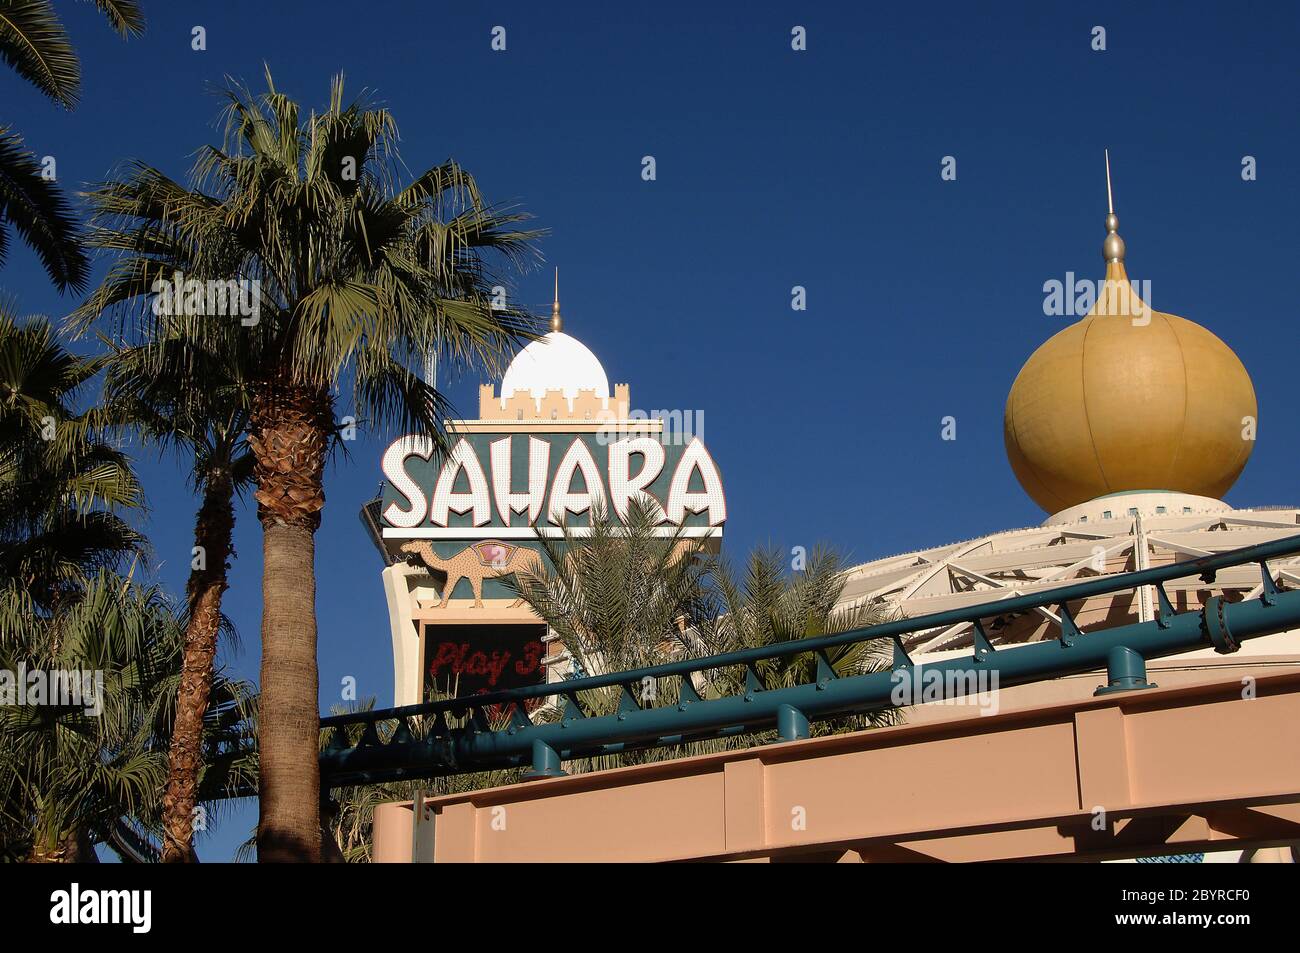 Sahara Hotel Las Vegas 477 Hotel and most important places in Las Vegas The most beautiful place in Las Vegas Stock Photo